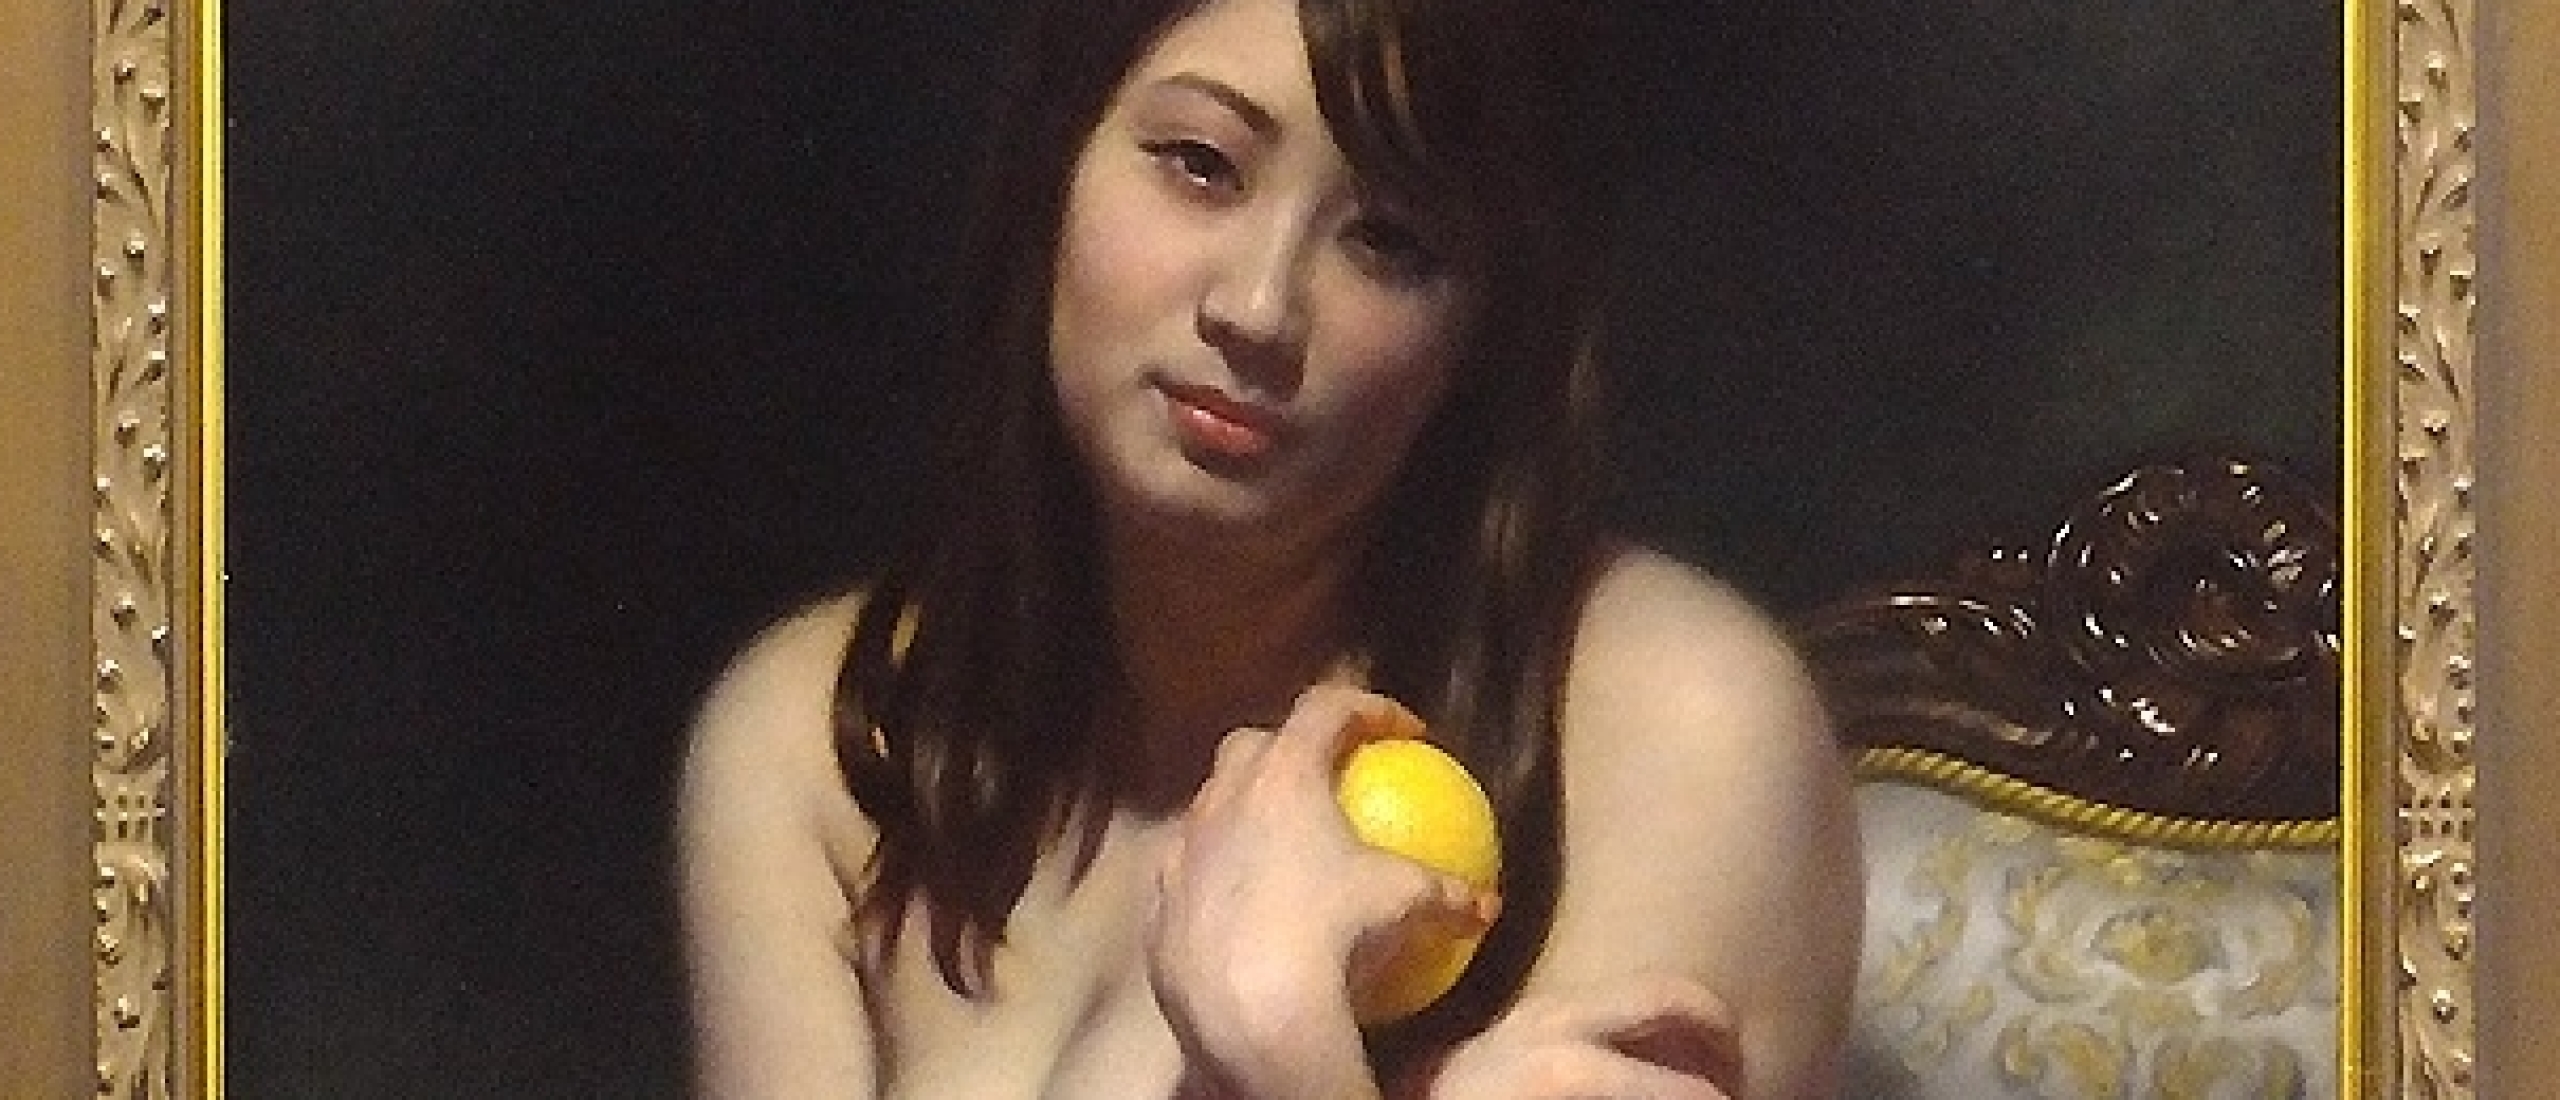 The Japanese Painter Tetsuya Mishima and His Fascination for Female Buttocks